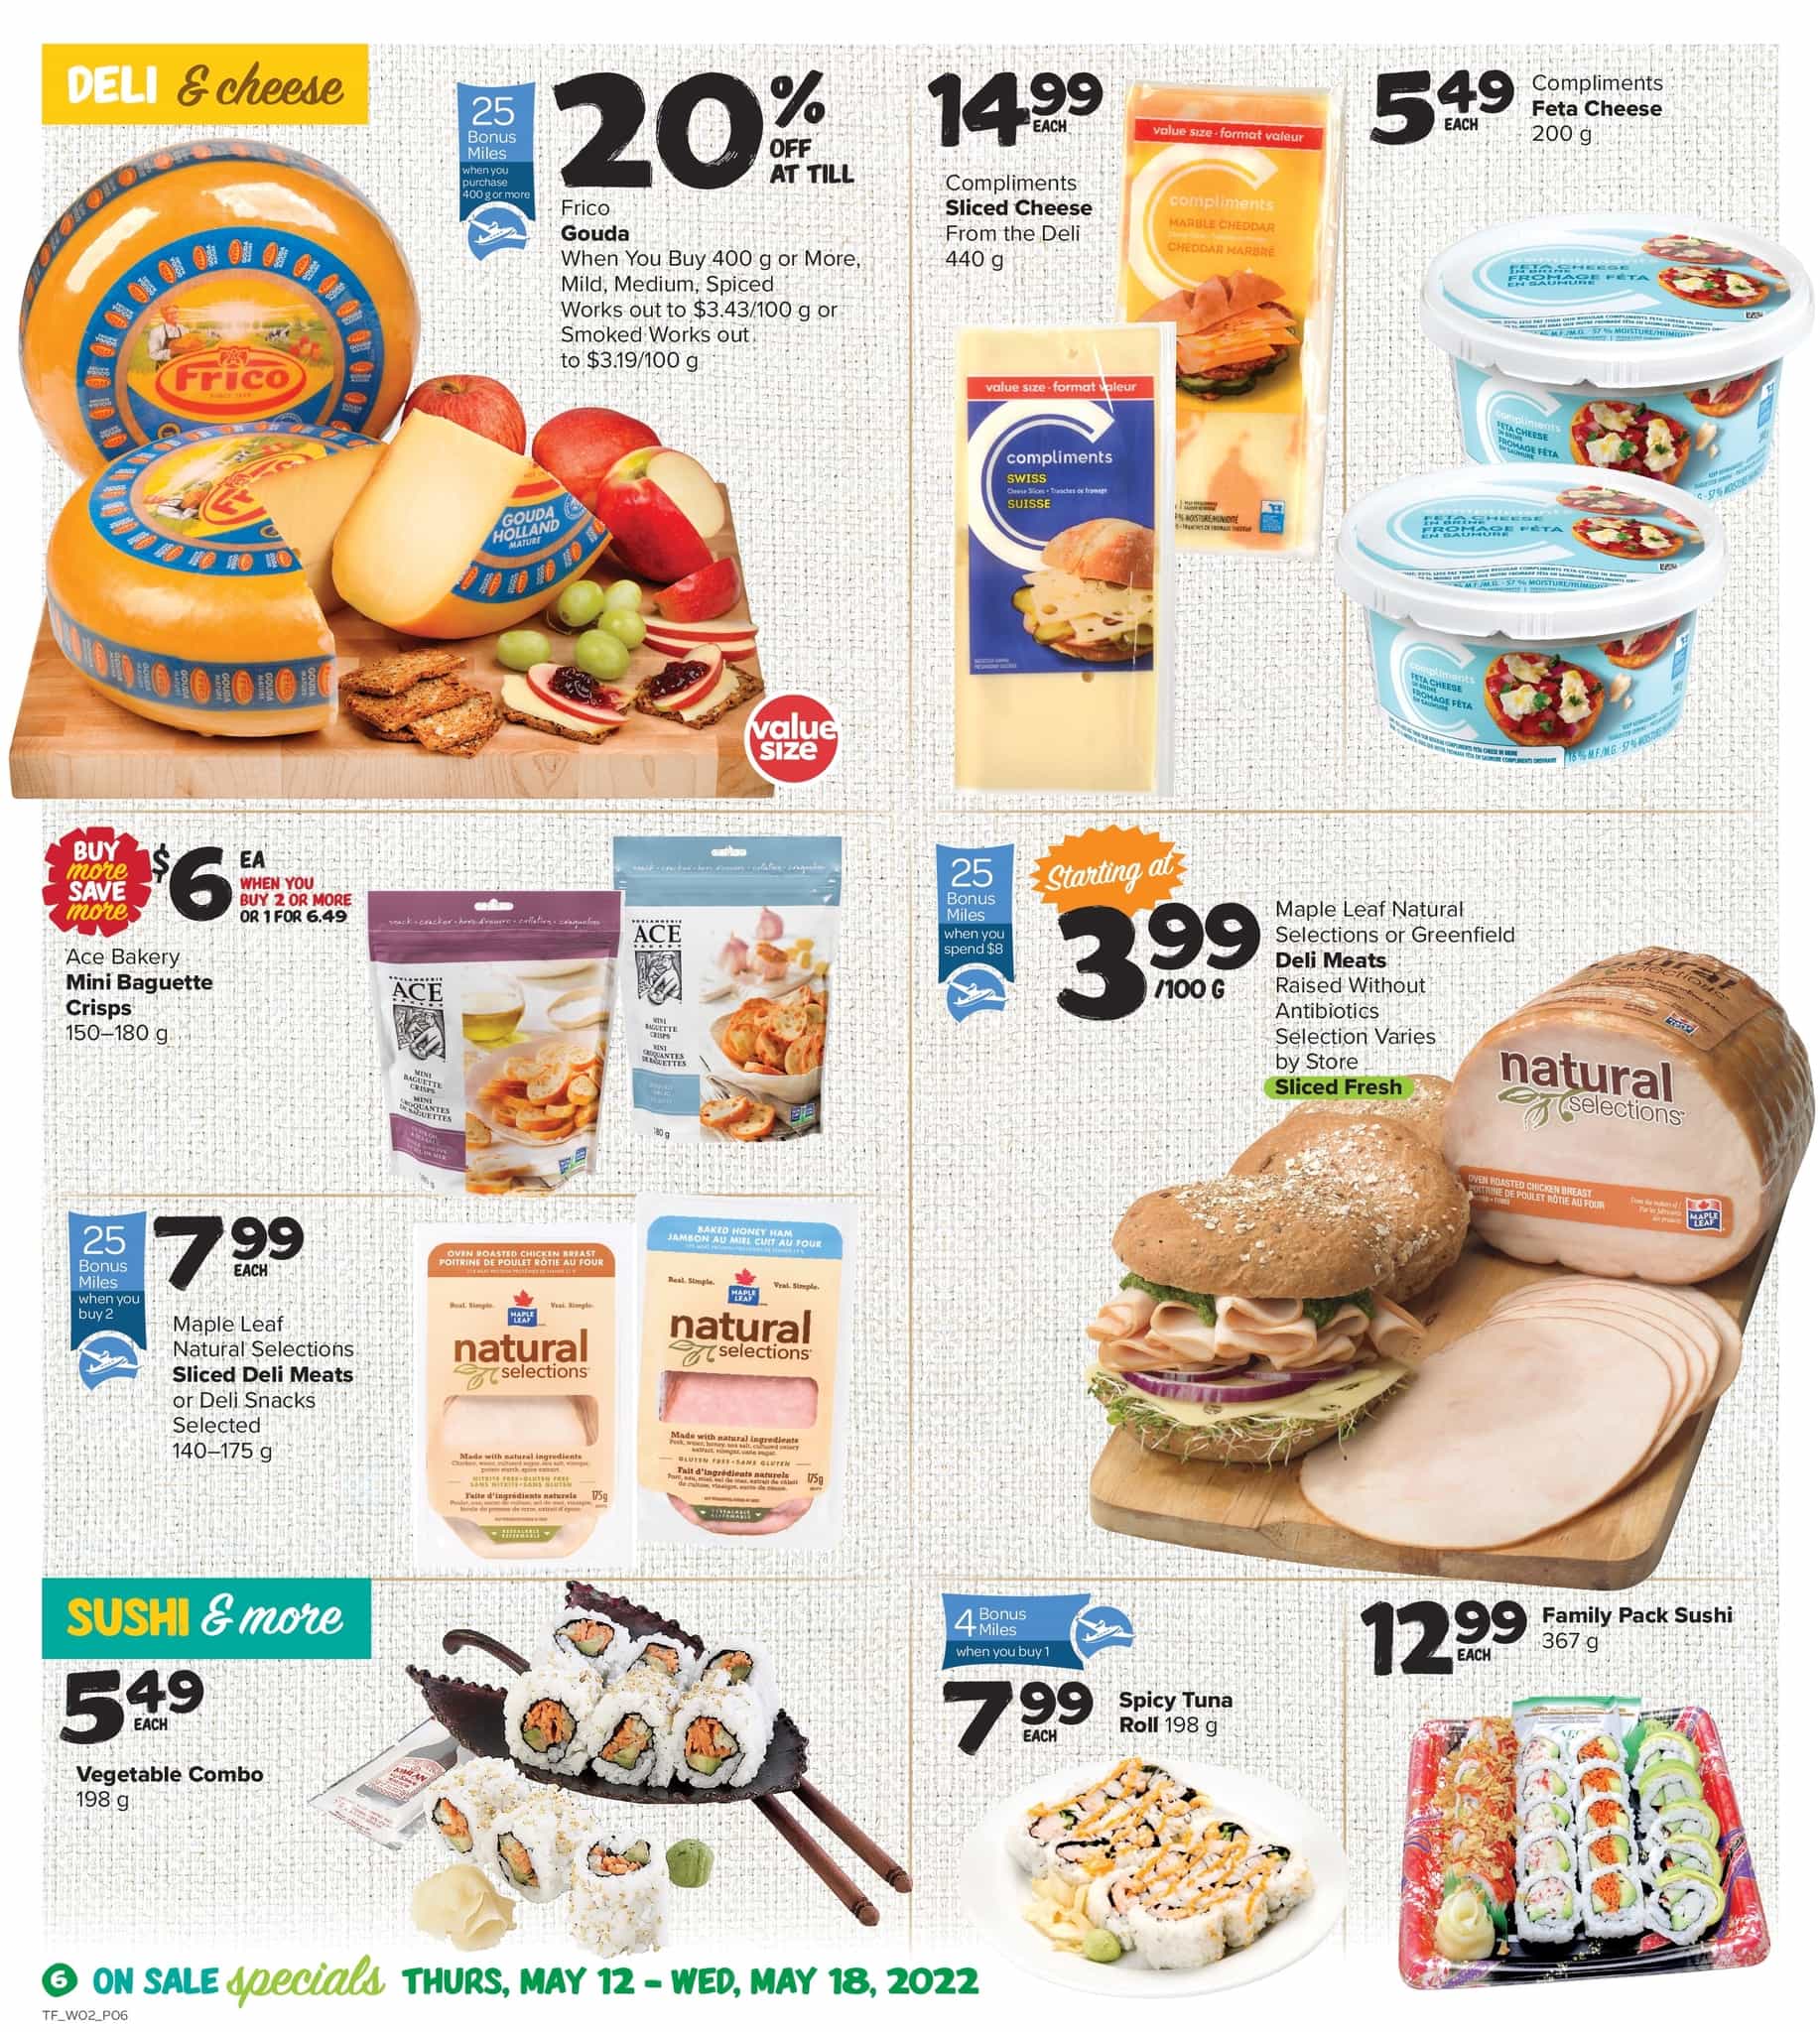 Thrifty Foods - Weekly Flyer Specials - Page 6